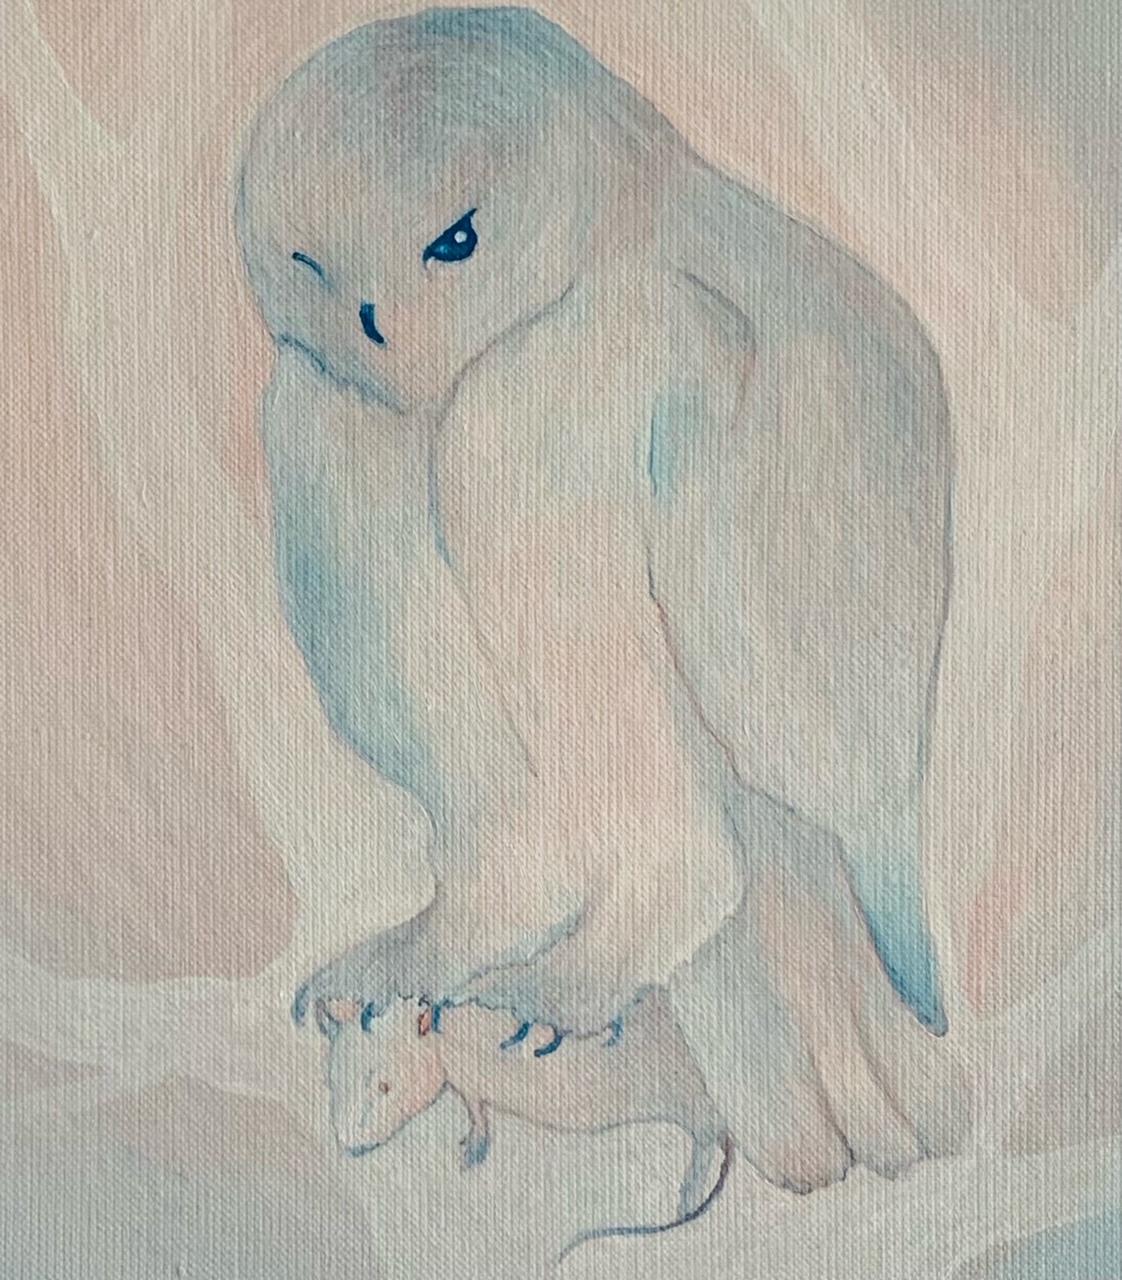 One Owl One Mouse -  Figurative Animal Oil Painting, Magical Realism For Sale 1